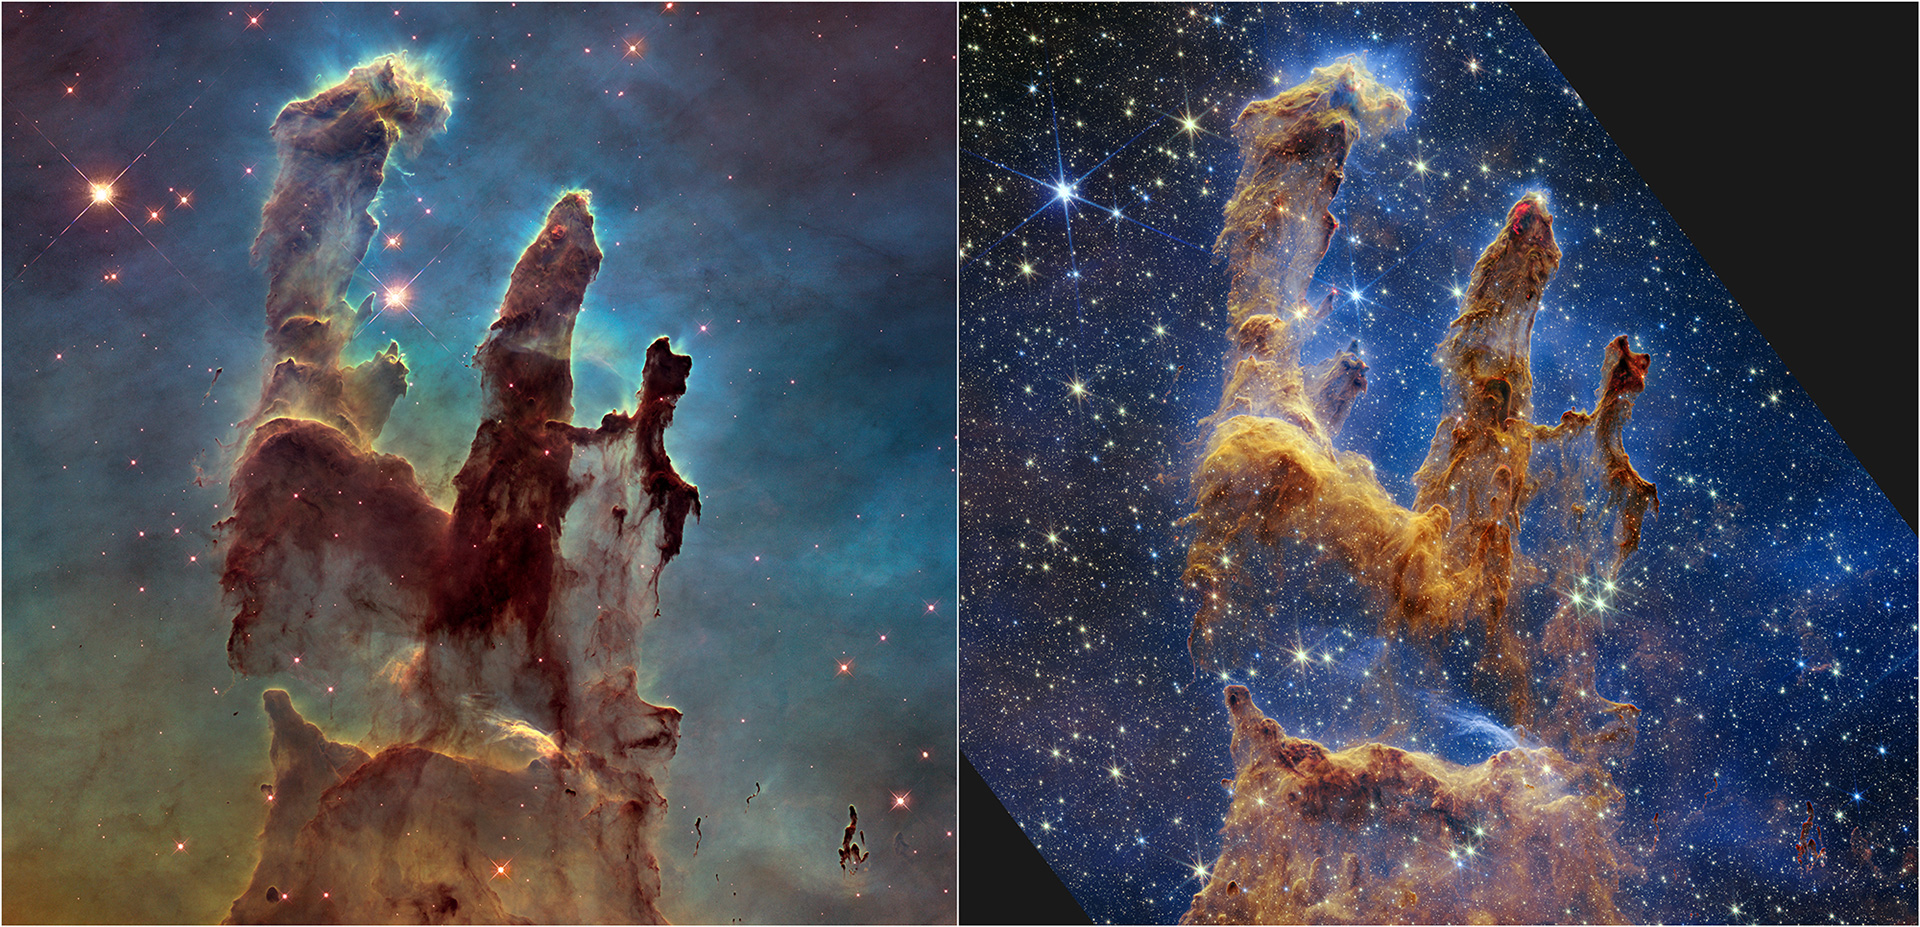 Pillars of Creation (Hubble and Webb Images Side by Side)" data-uuid="cb891074-5732-34a5-bedb-cf448b441ffe